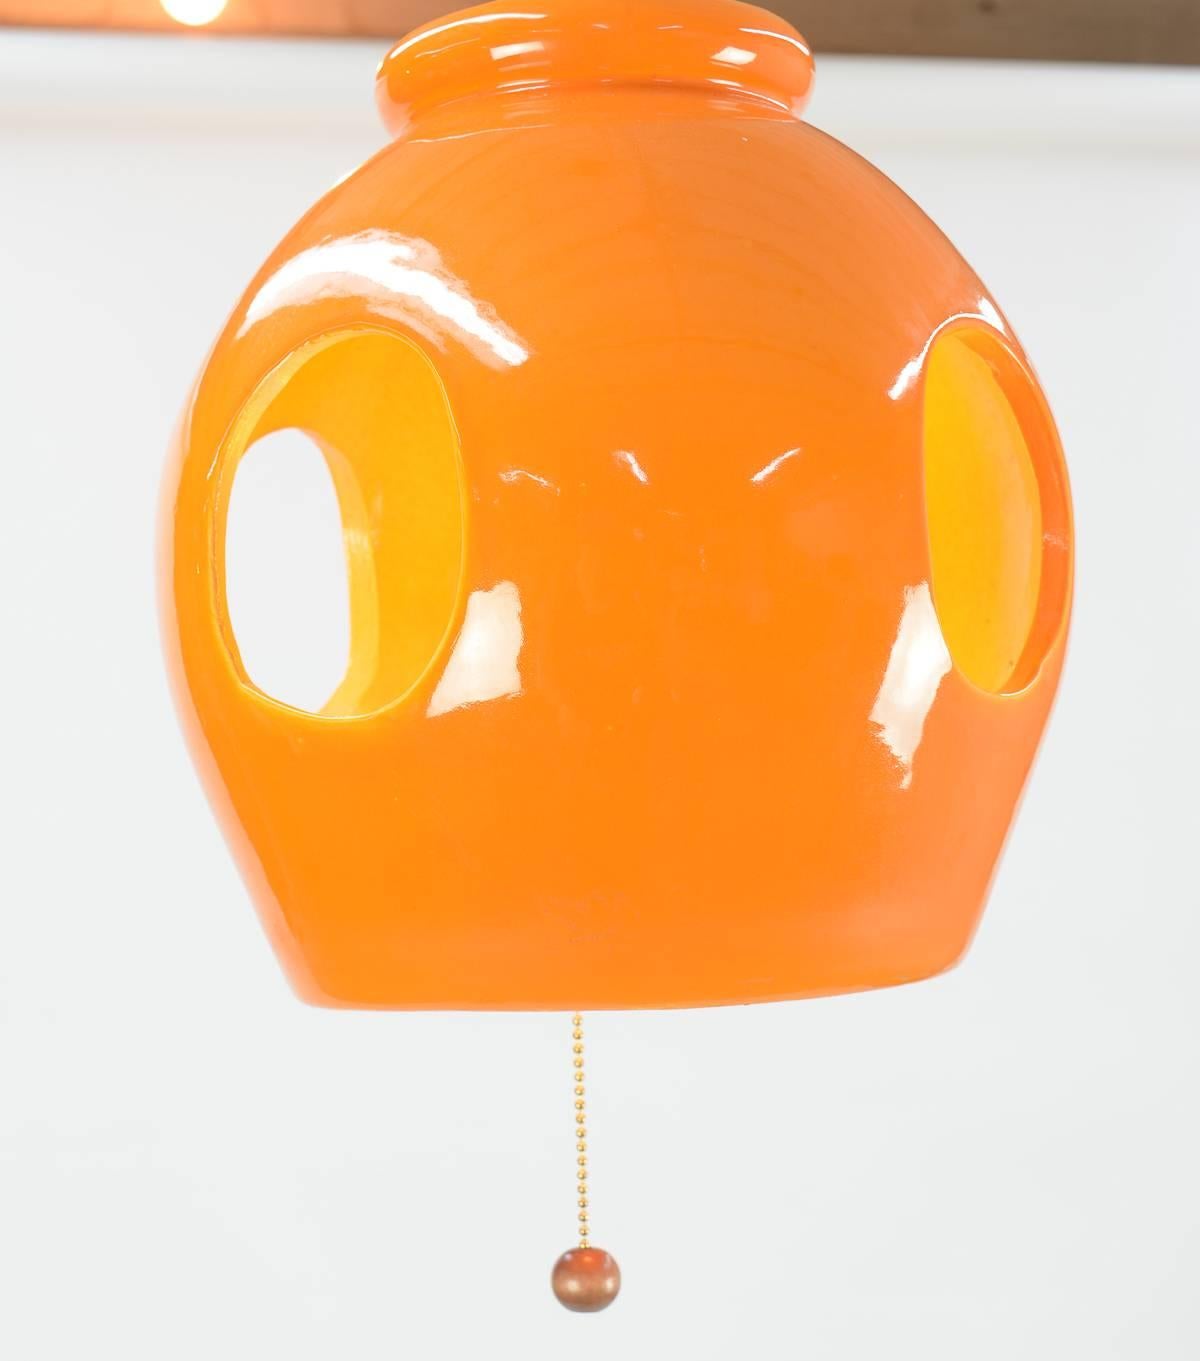 This playful orange ceramic pop art pendant lamp will delightfully light up the room in more ways than one.  A California Mid-Century classic.